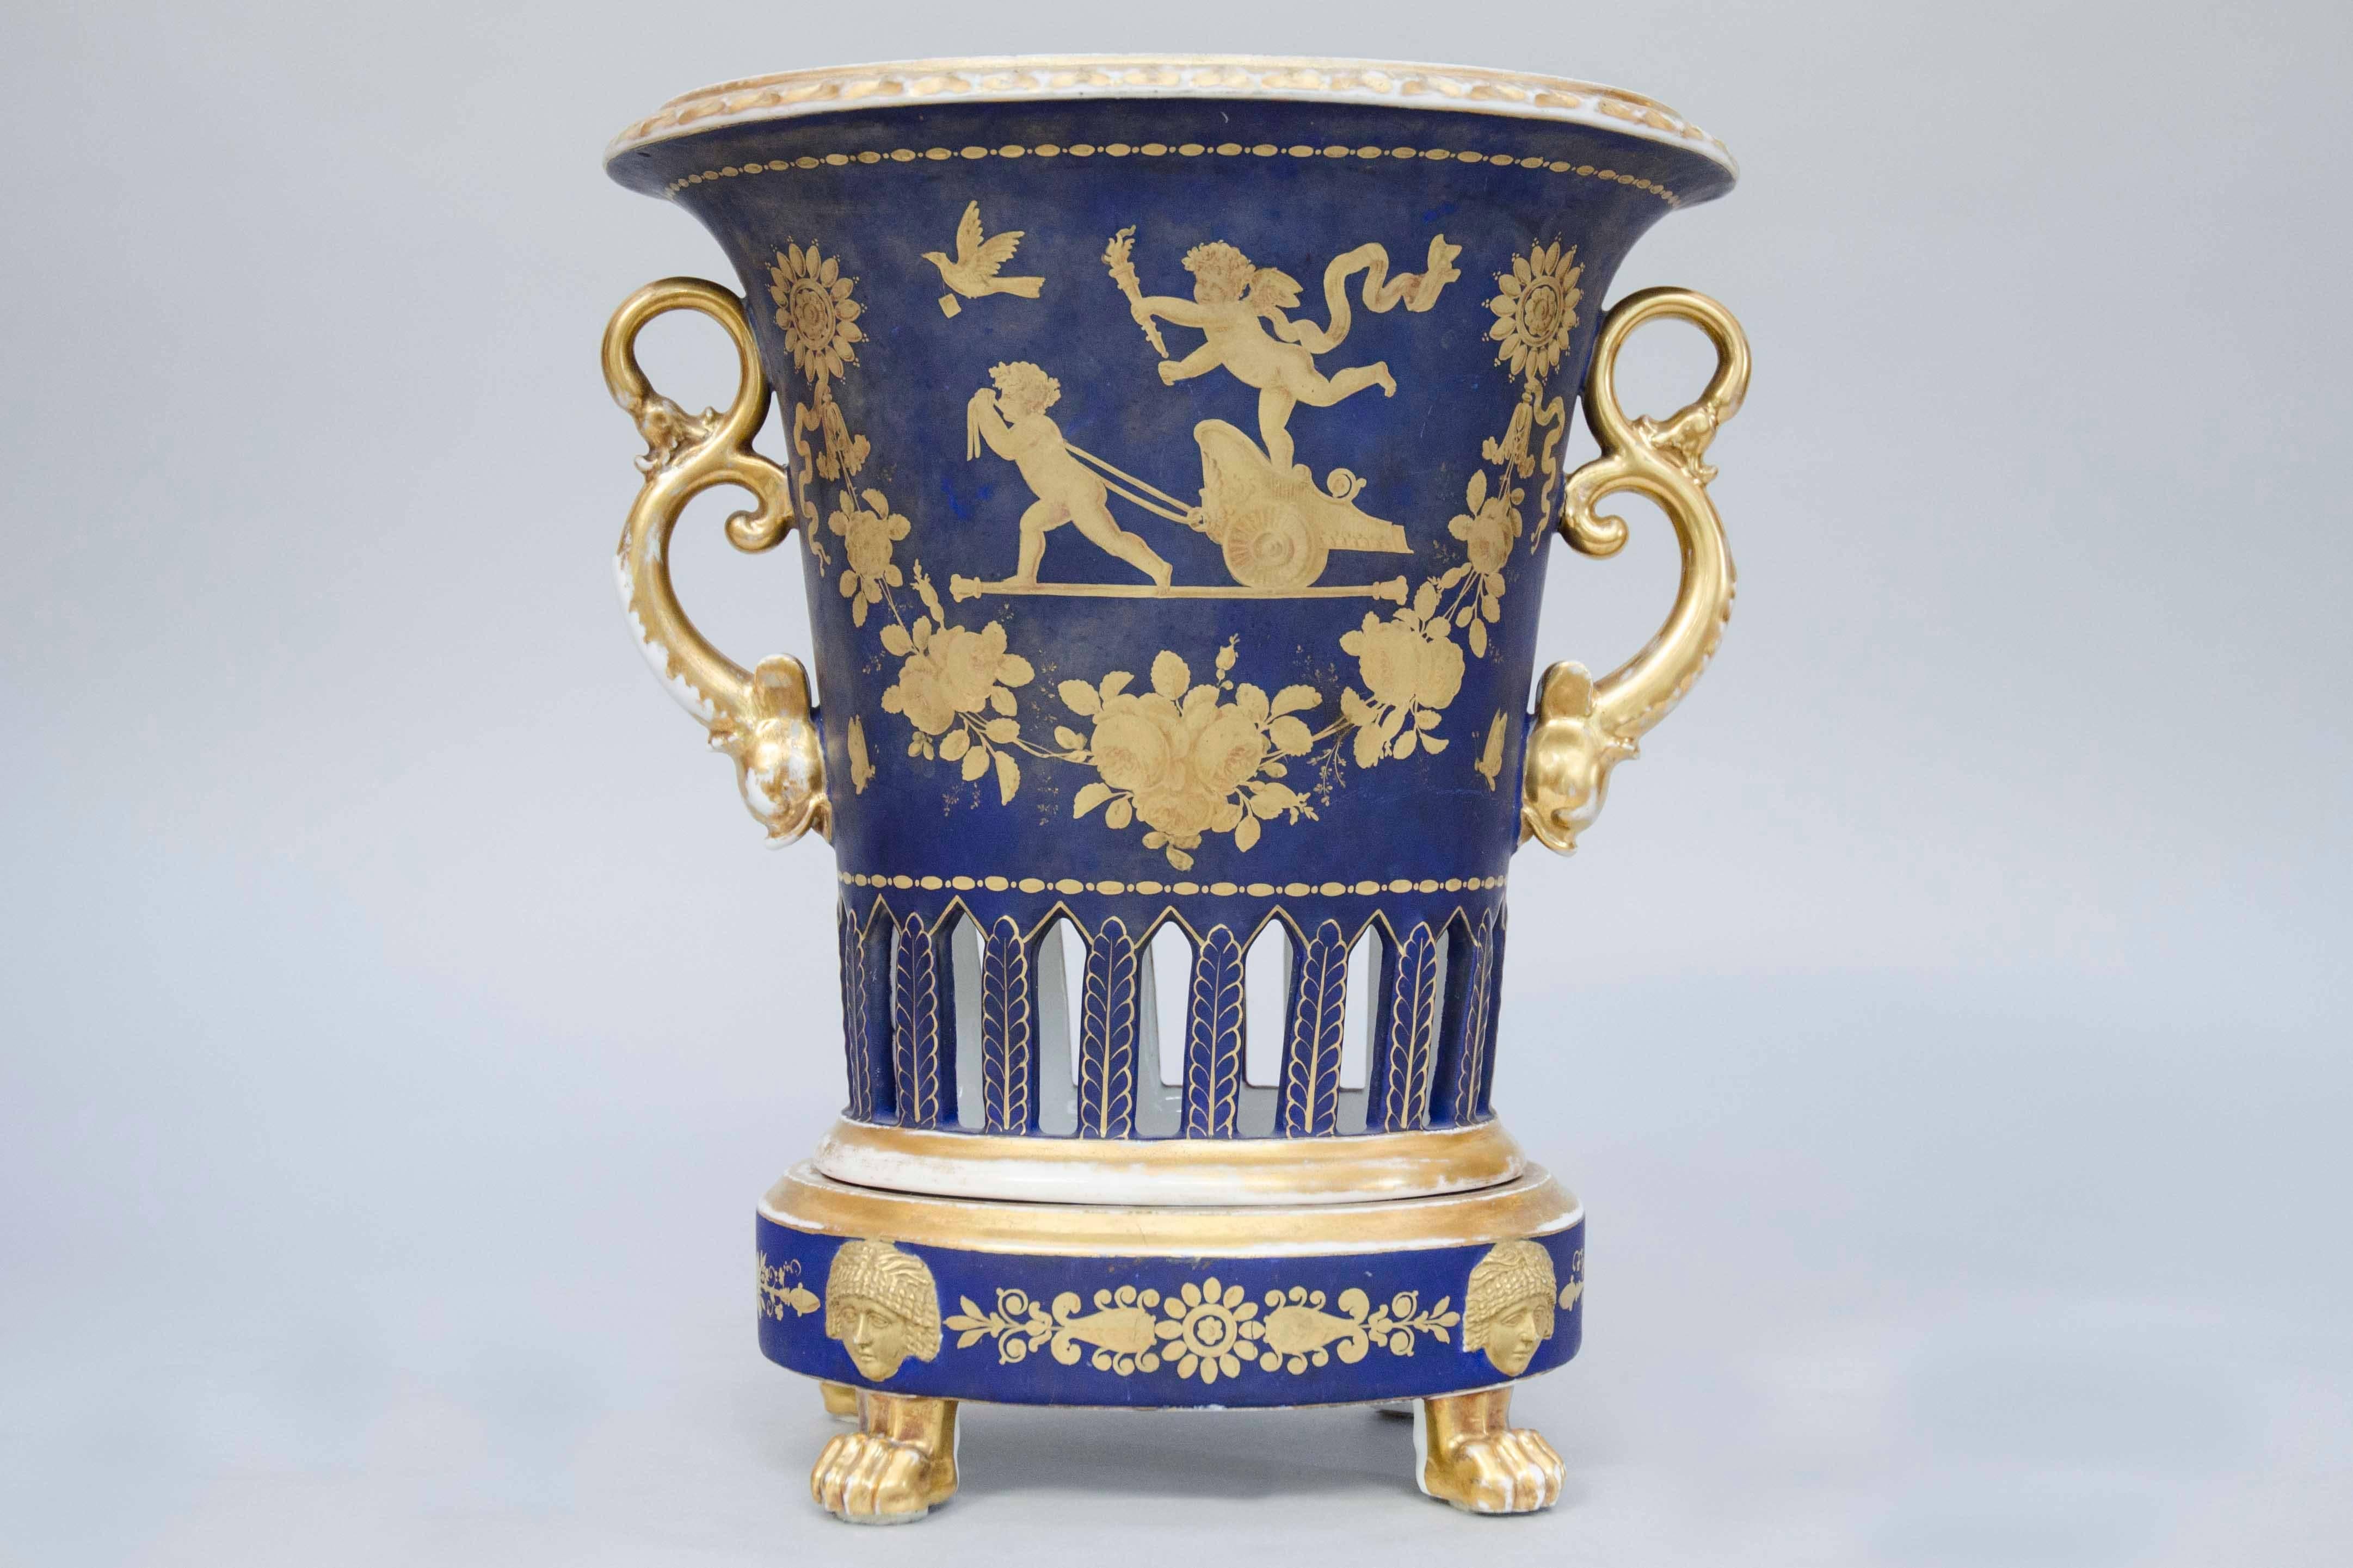 Pendulum clock in a porcelain urn with gilded neoclassical decoration, like horns of plenty and angles riding a chariot to deliver the torch of passion and a love letter. Deep blue ground. Dolphins handles. Paw feet. Original movement and enamel